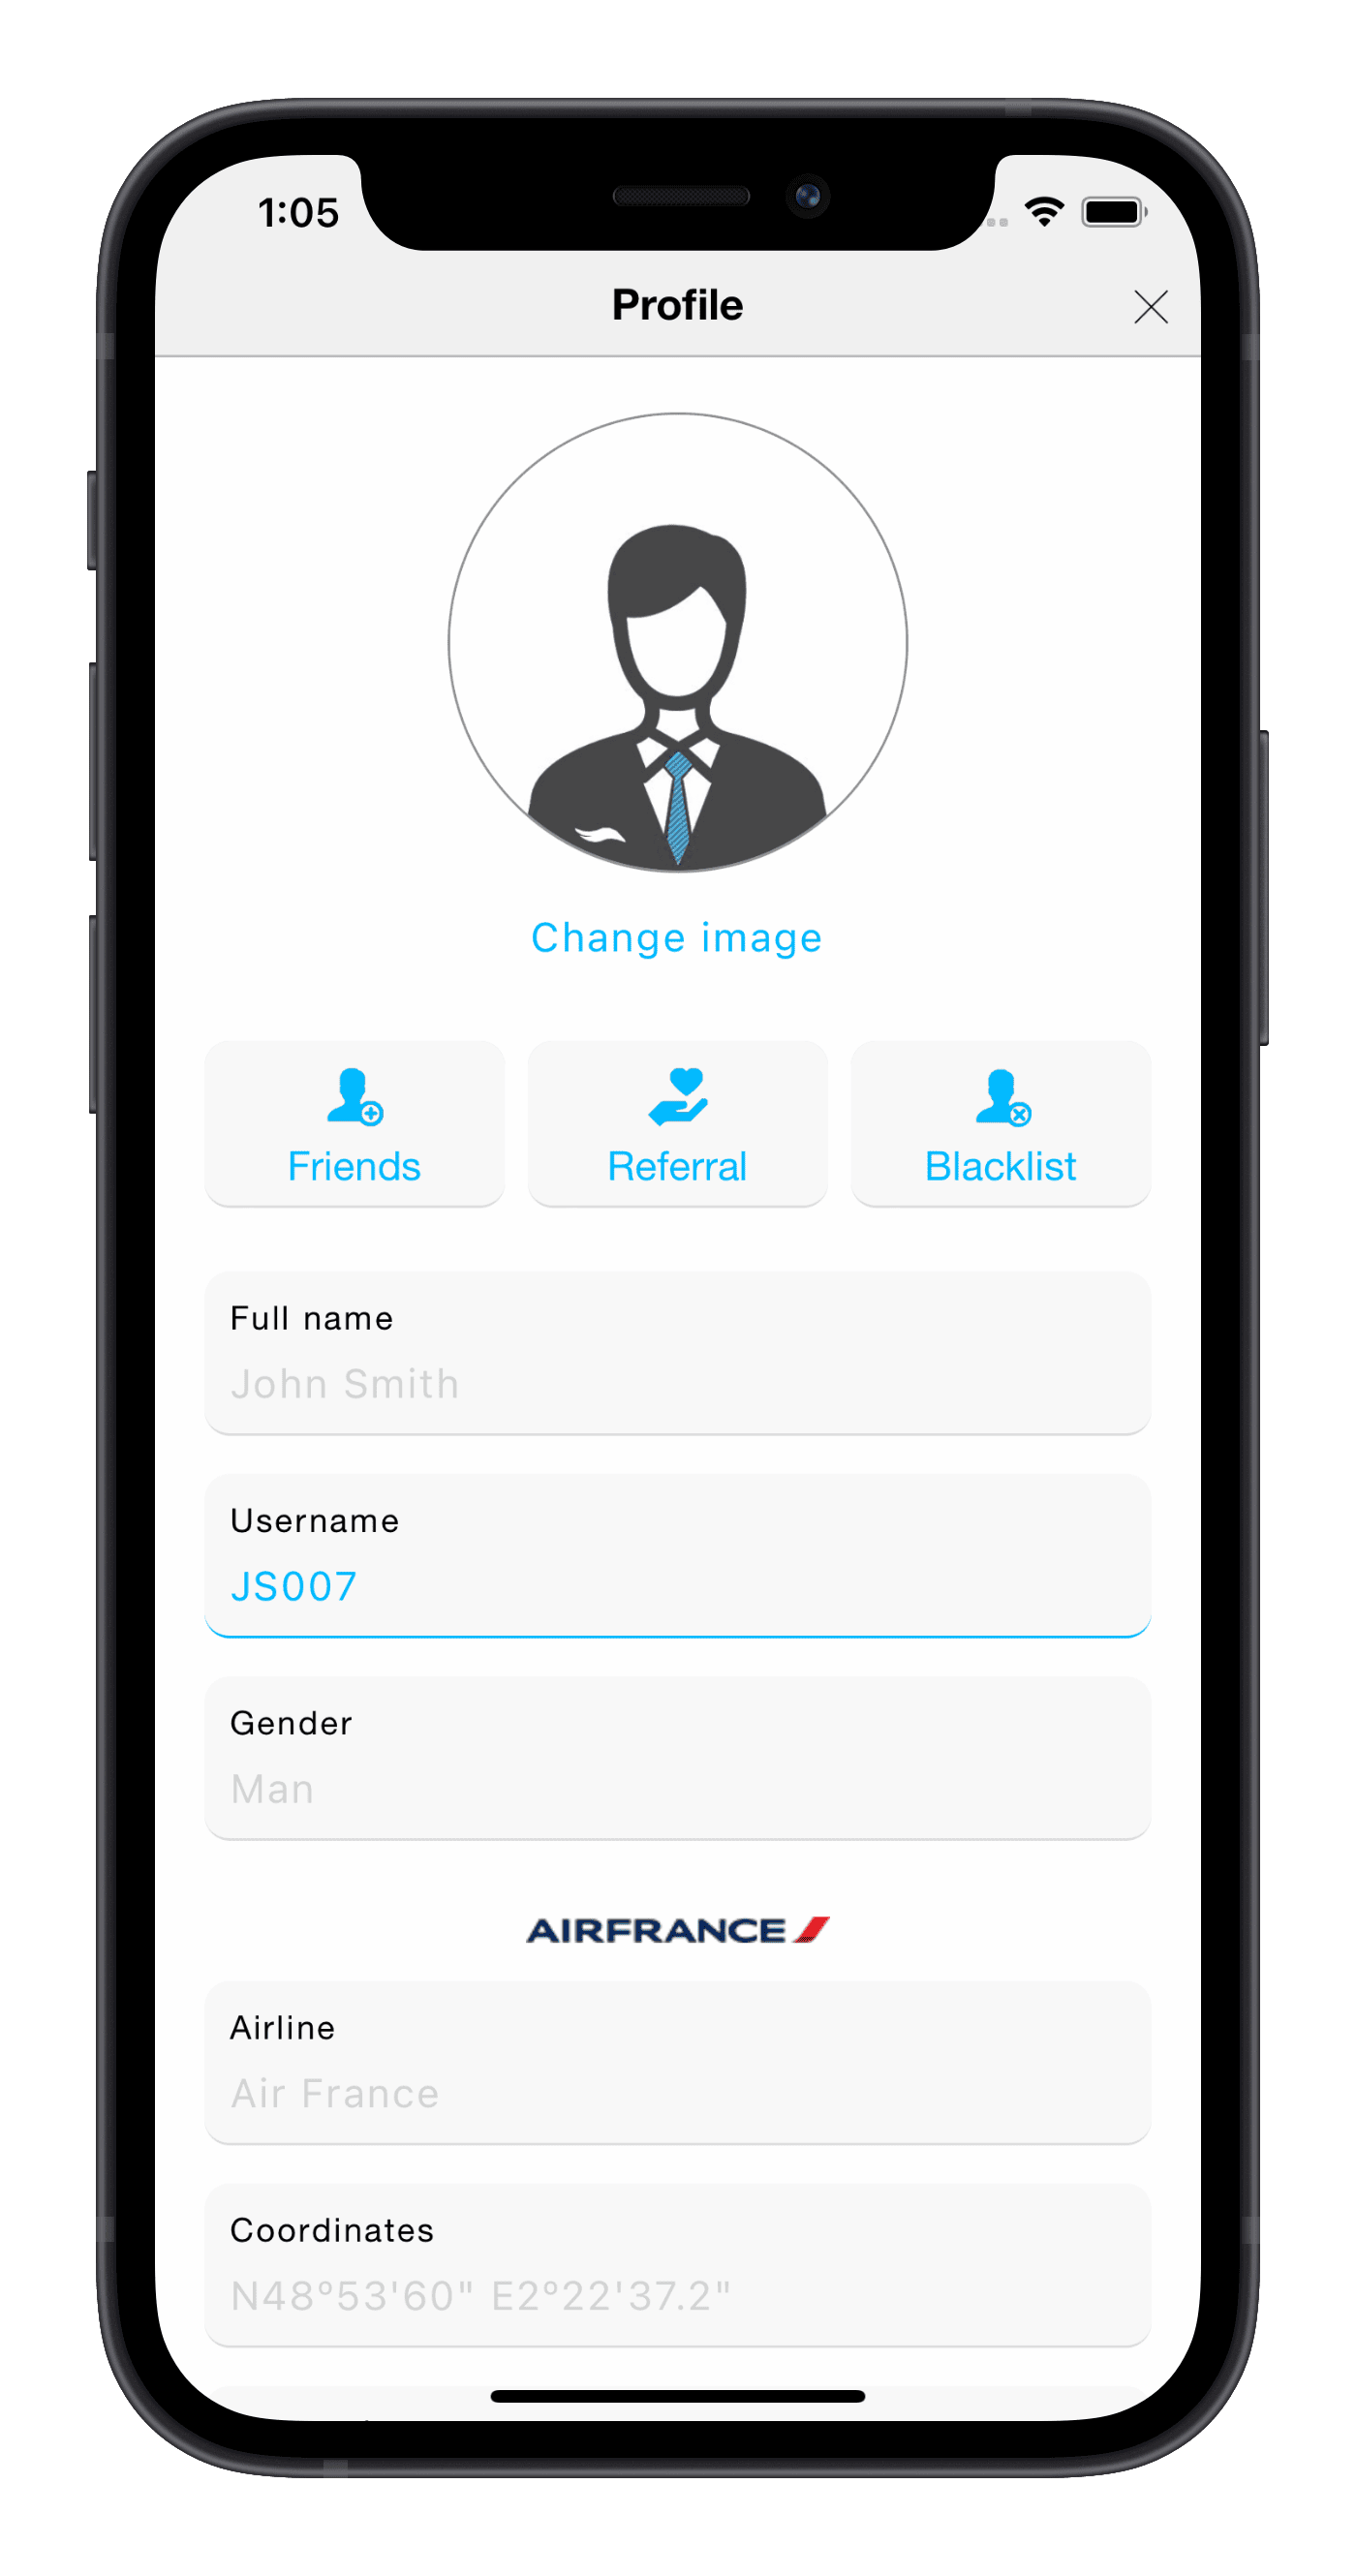 An iPhone X on LayOver S.N. user profile view